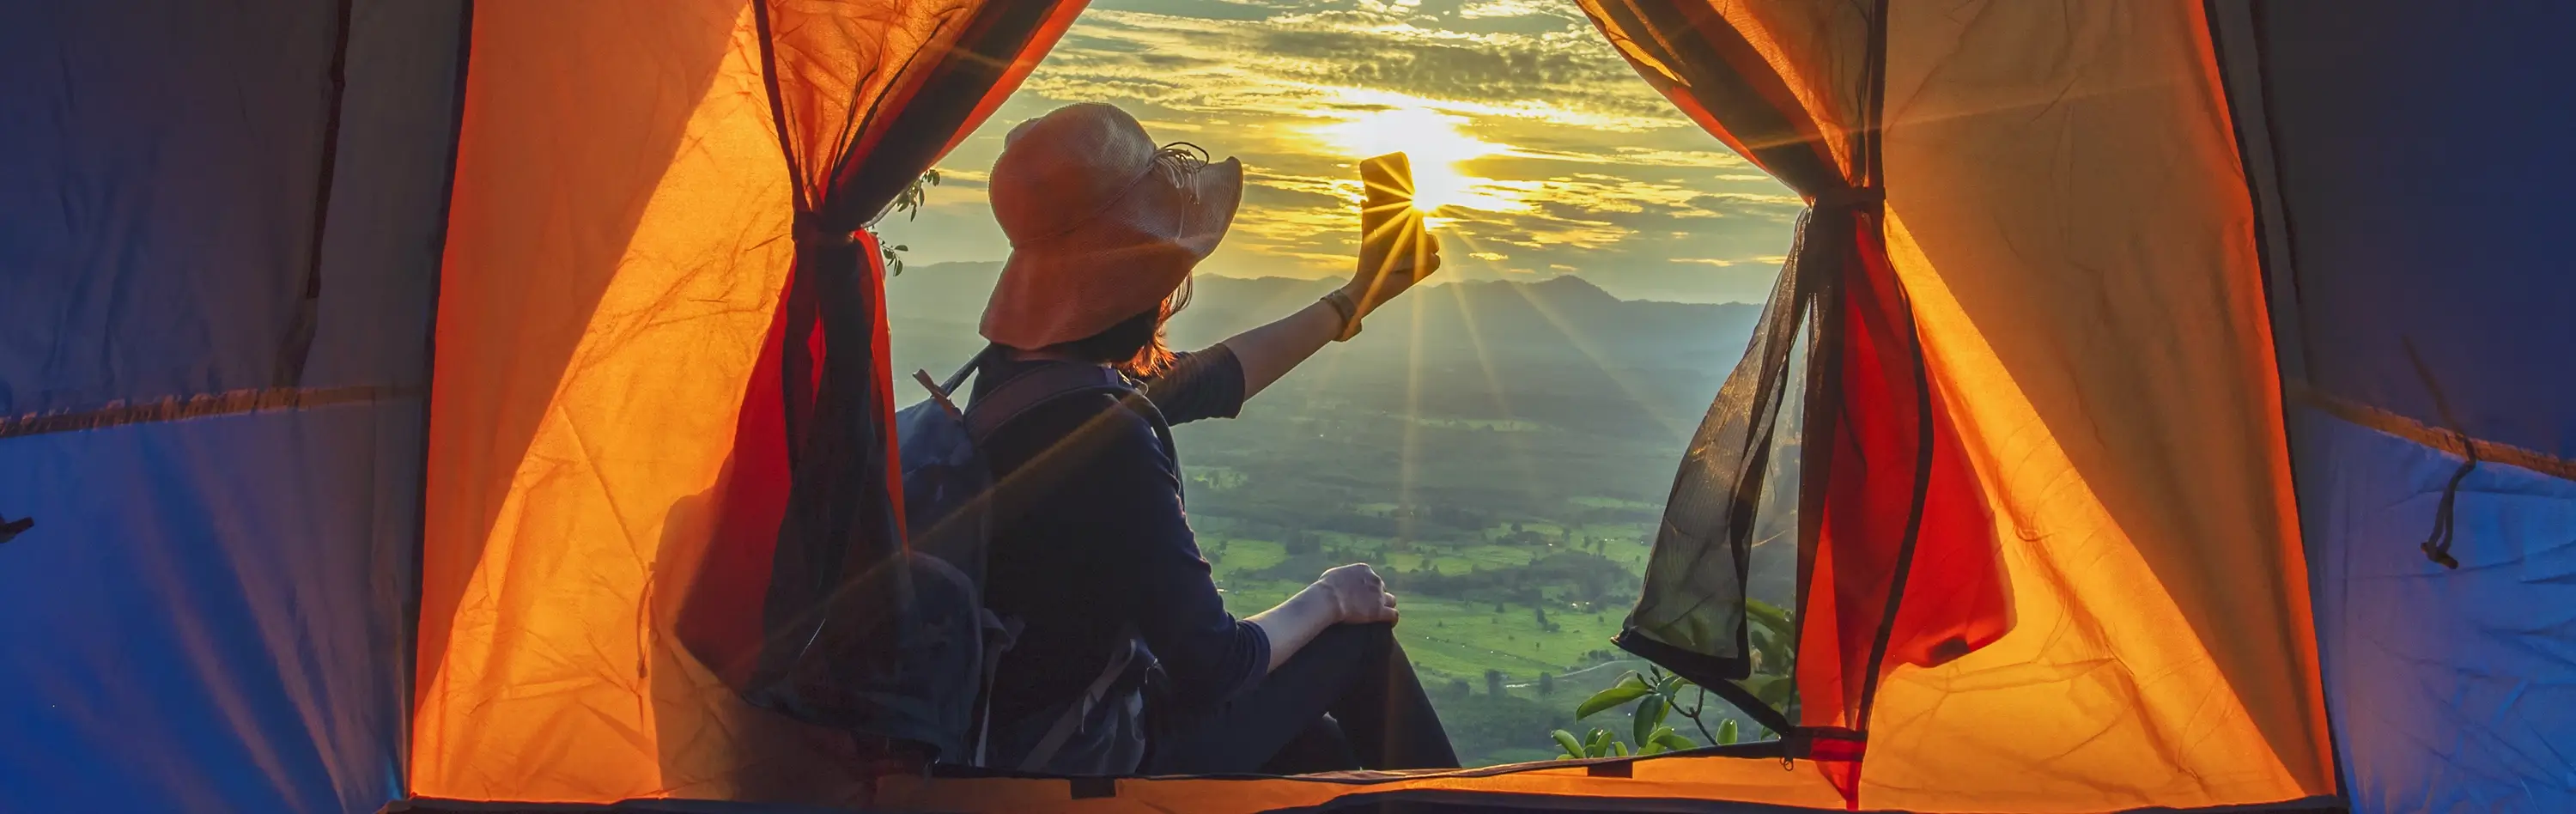 A woman capturing a sunrise outside her tent in nature epitomizes the fulfillment attainable when prioritizing mental wellbeing.